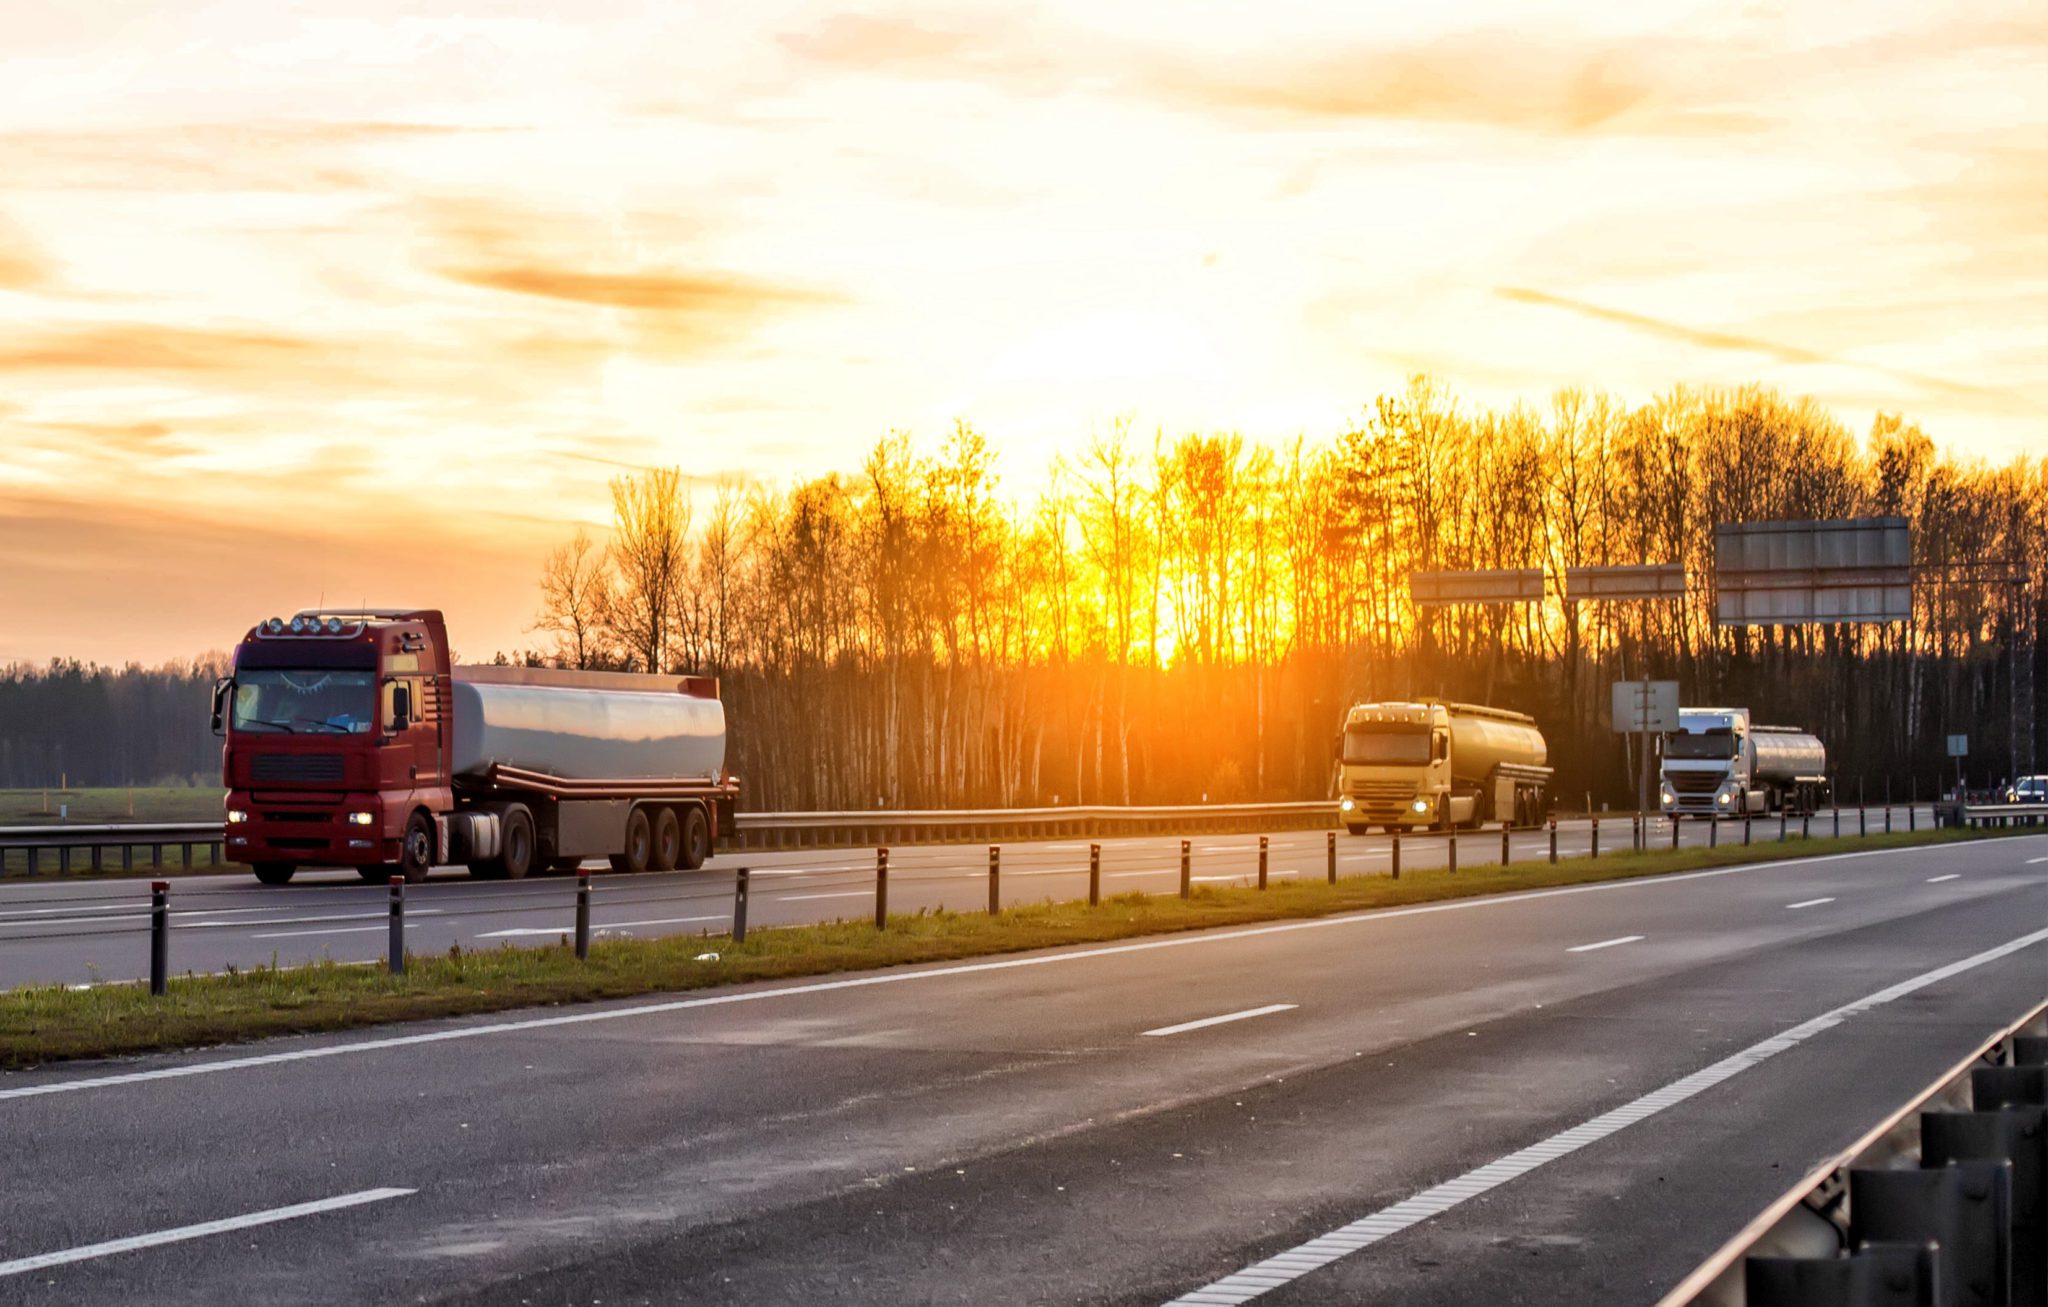 A convoy of three trucks transports dangerous goods in tank semi-trailers on a motorway against the backdrop of sunset in the evening.